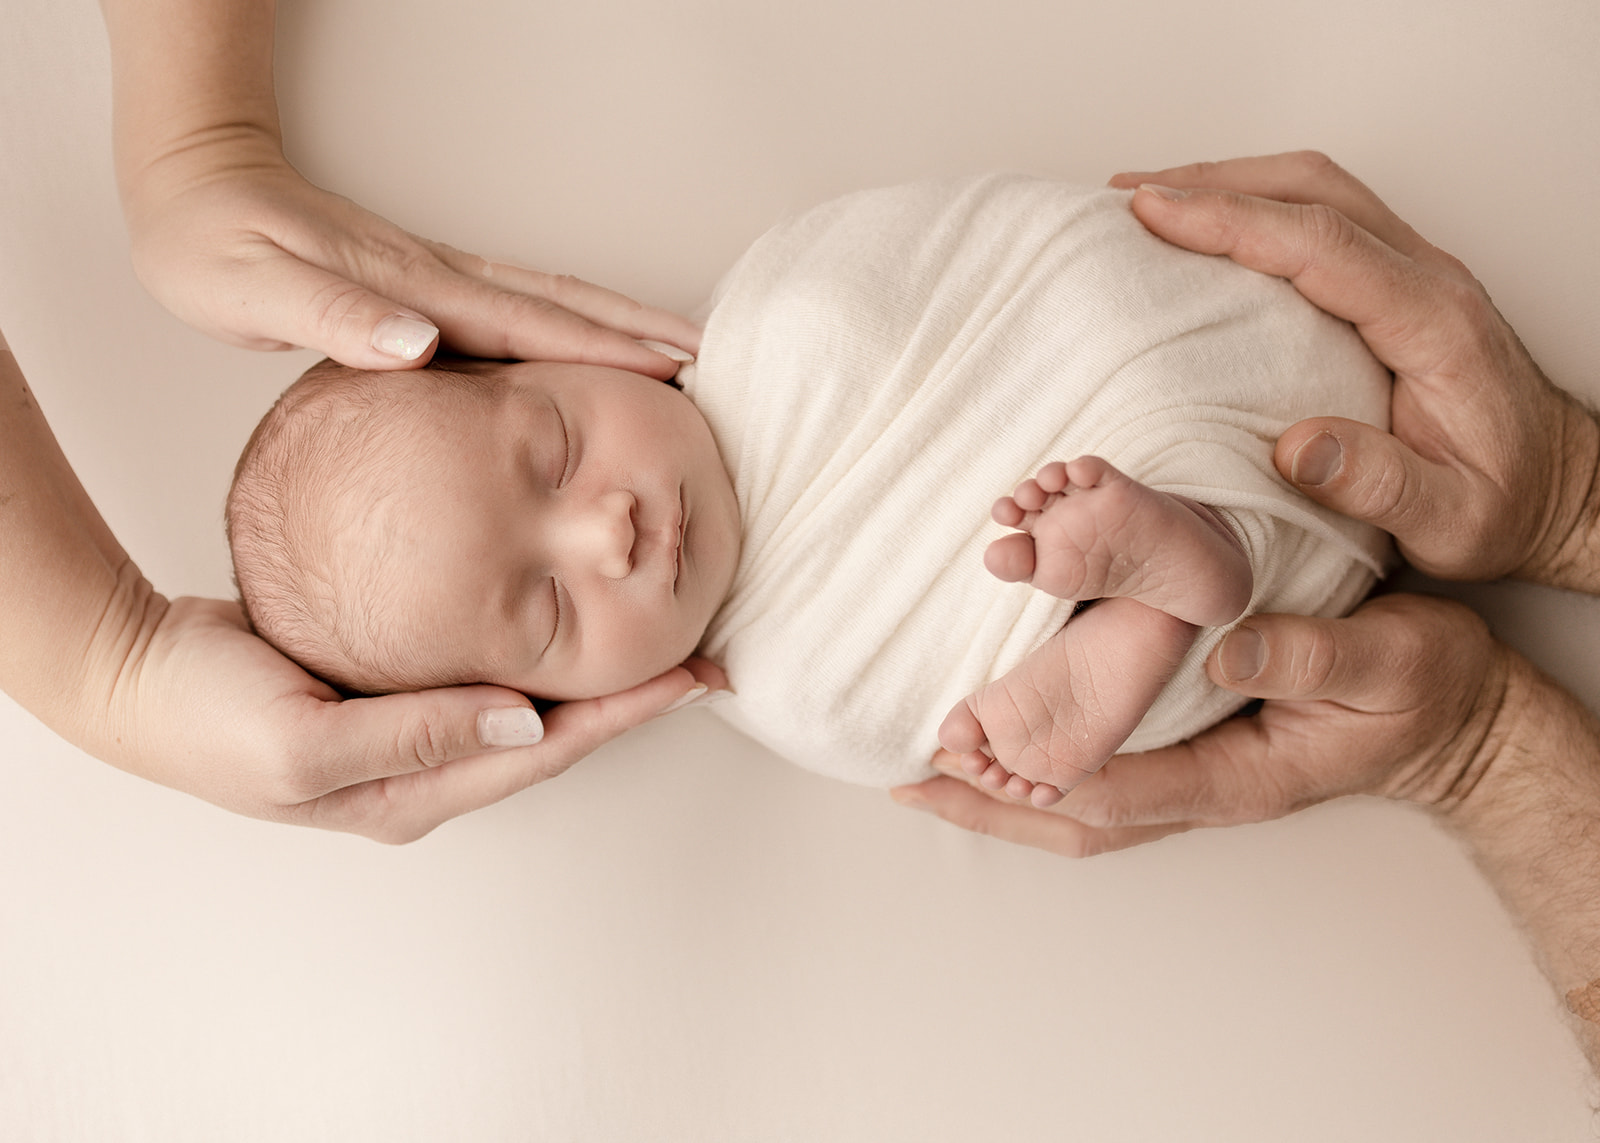 A newborn baby in a white swaddle with feet sticking out is held by mom and dad's hands